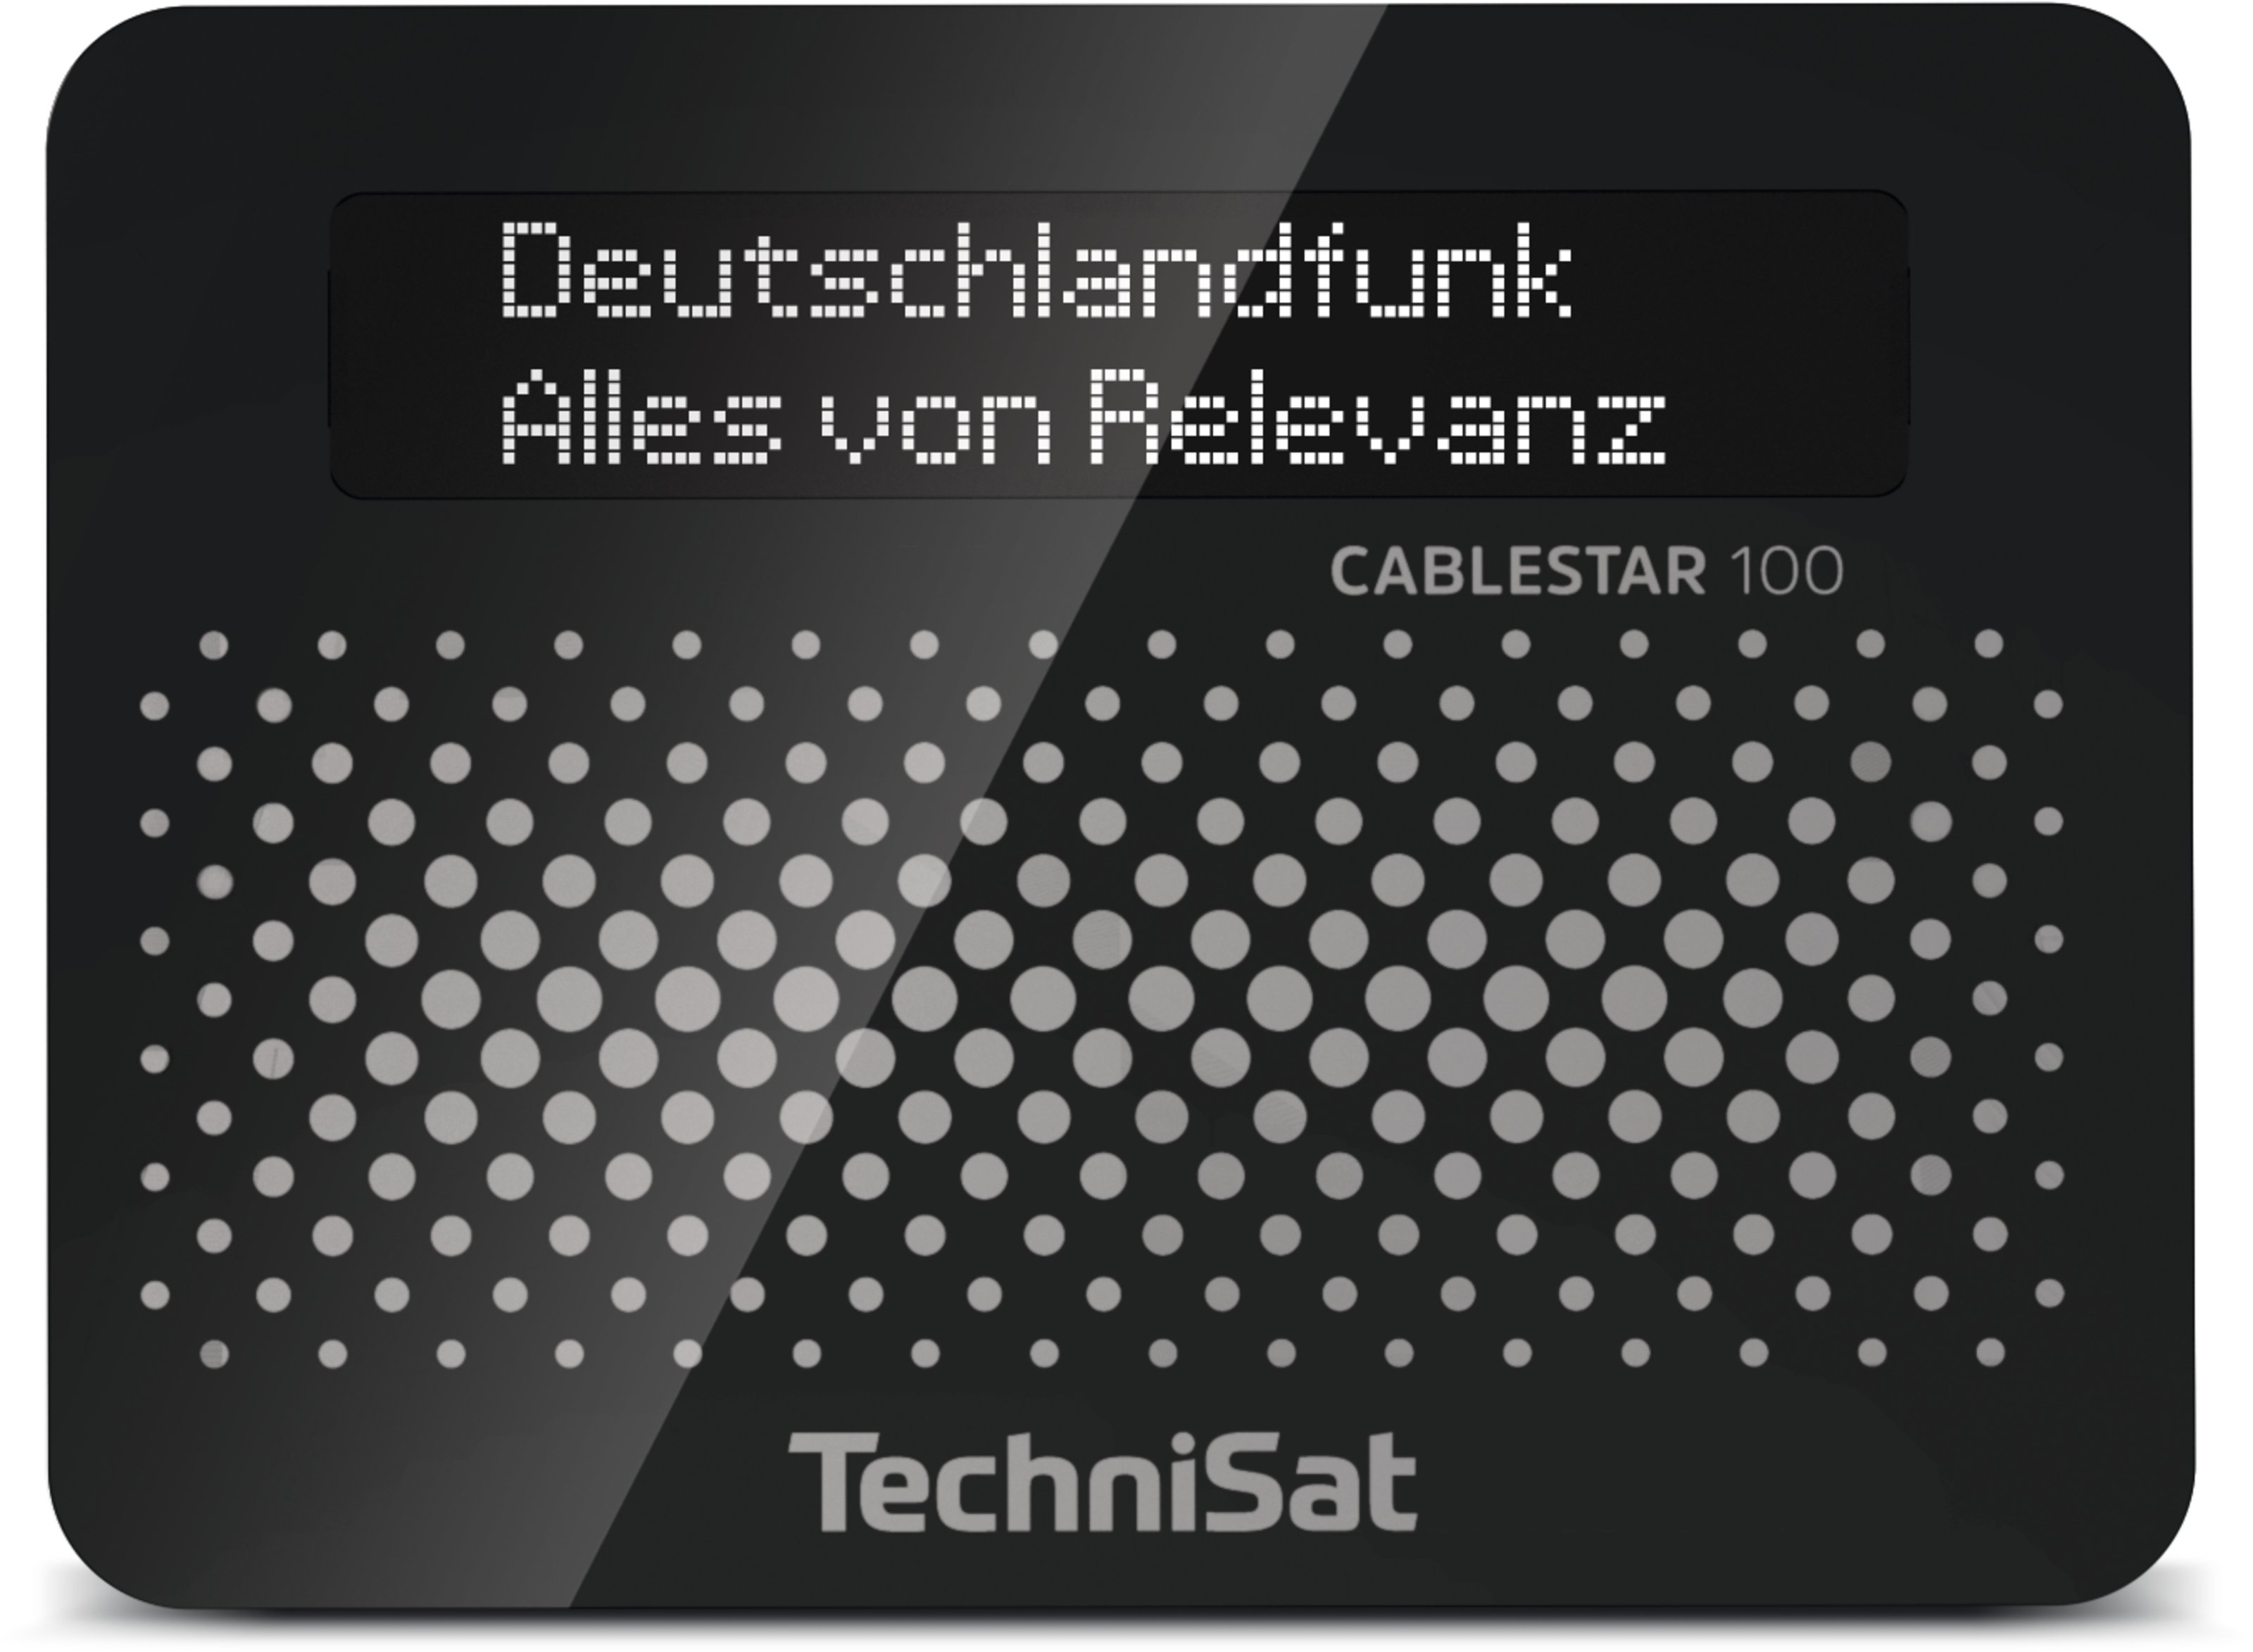 CABLESTAR 100